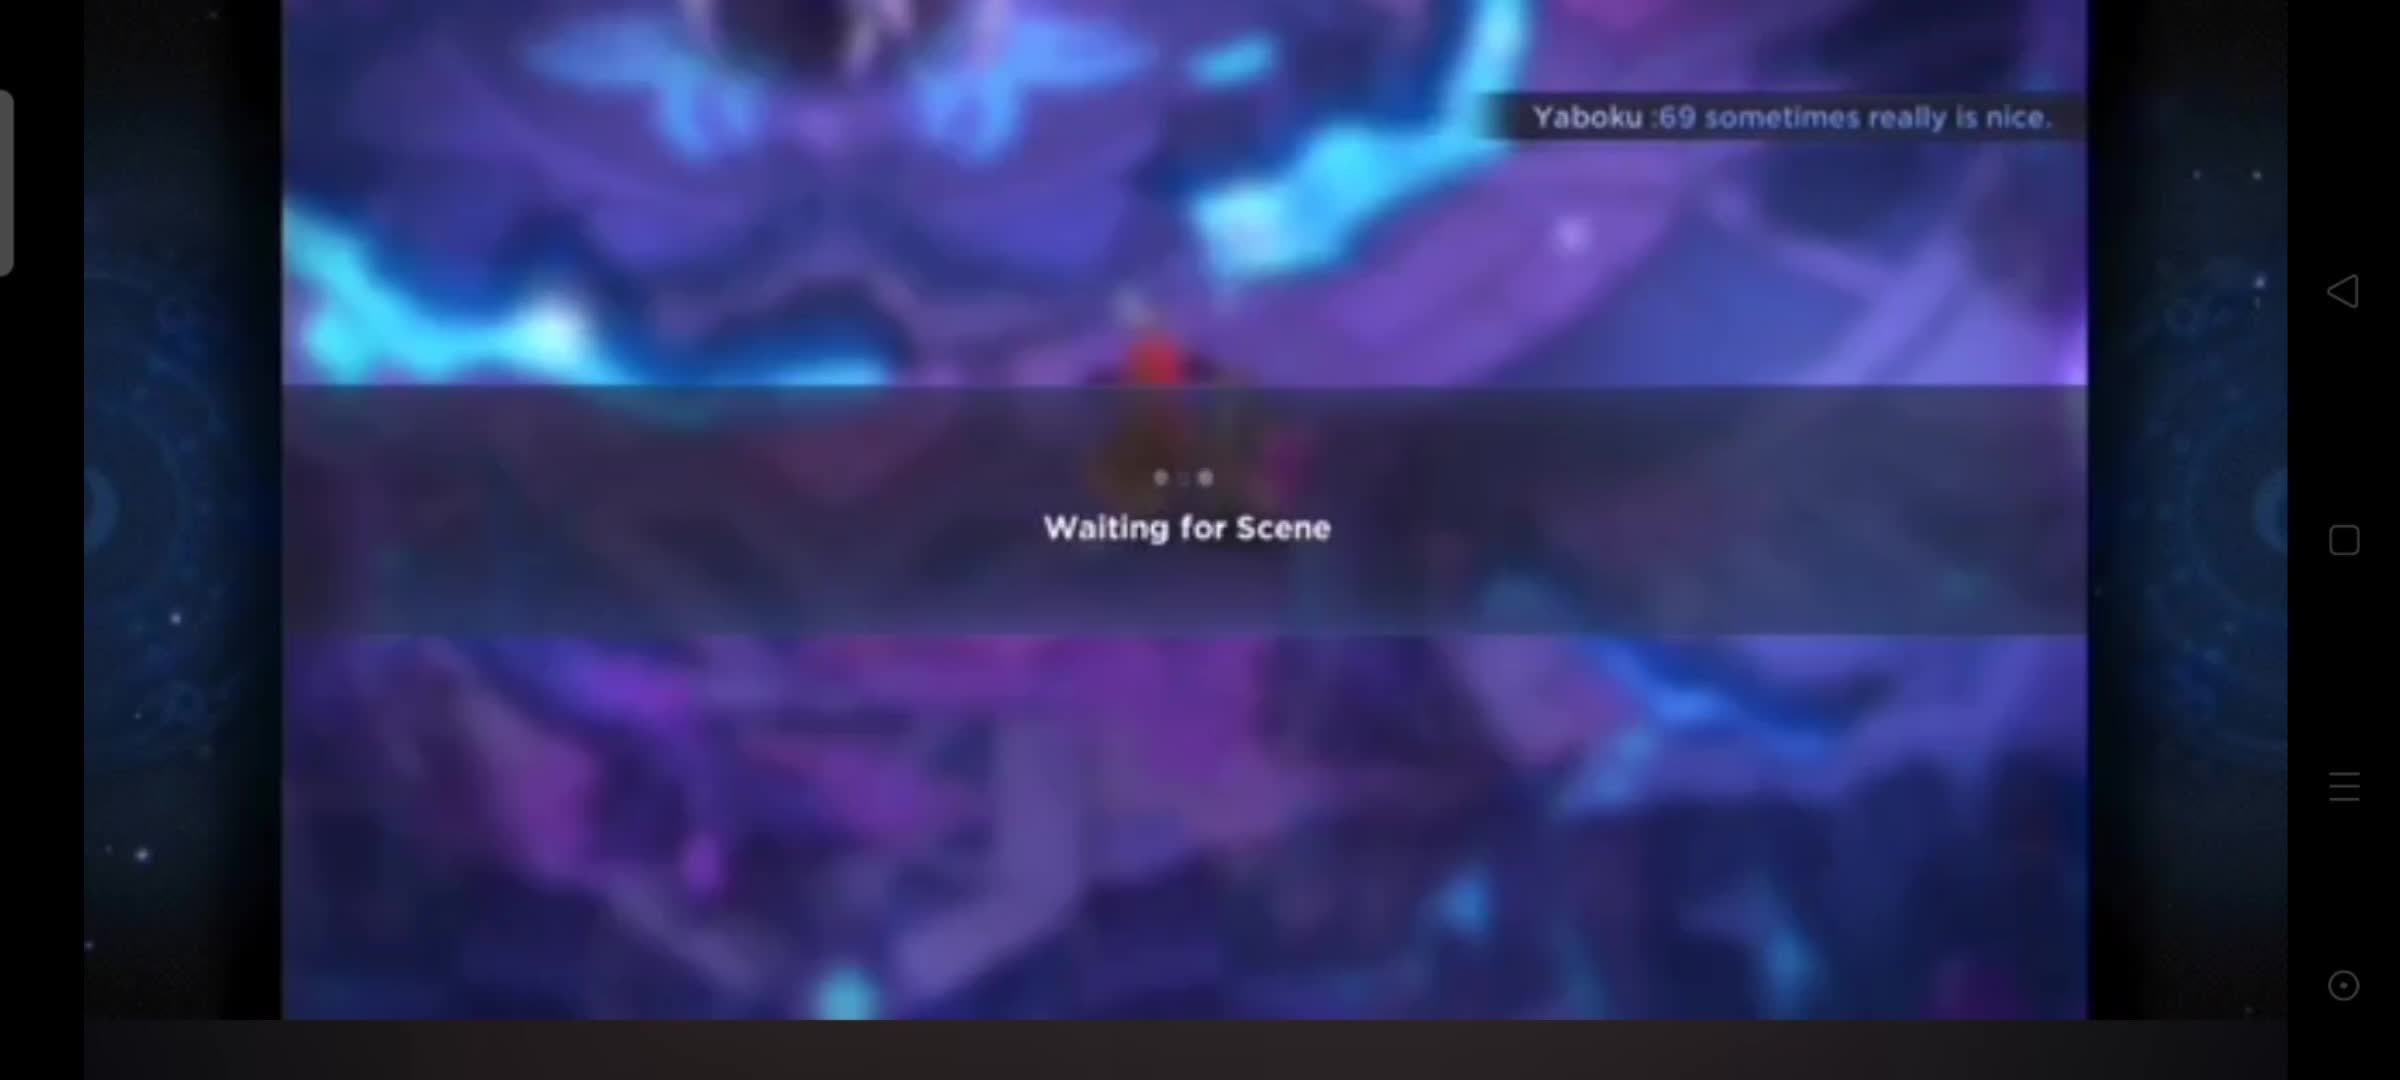 GrandChase - GLOBAL EN: Hacker Report - Hacker doing Dr7 and Clearing it in just a few seconds. video cover image 1